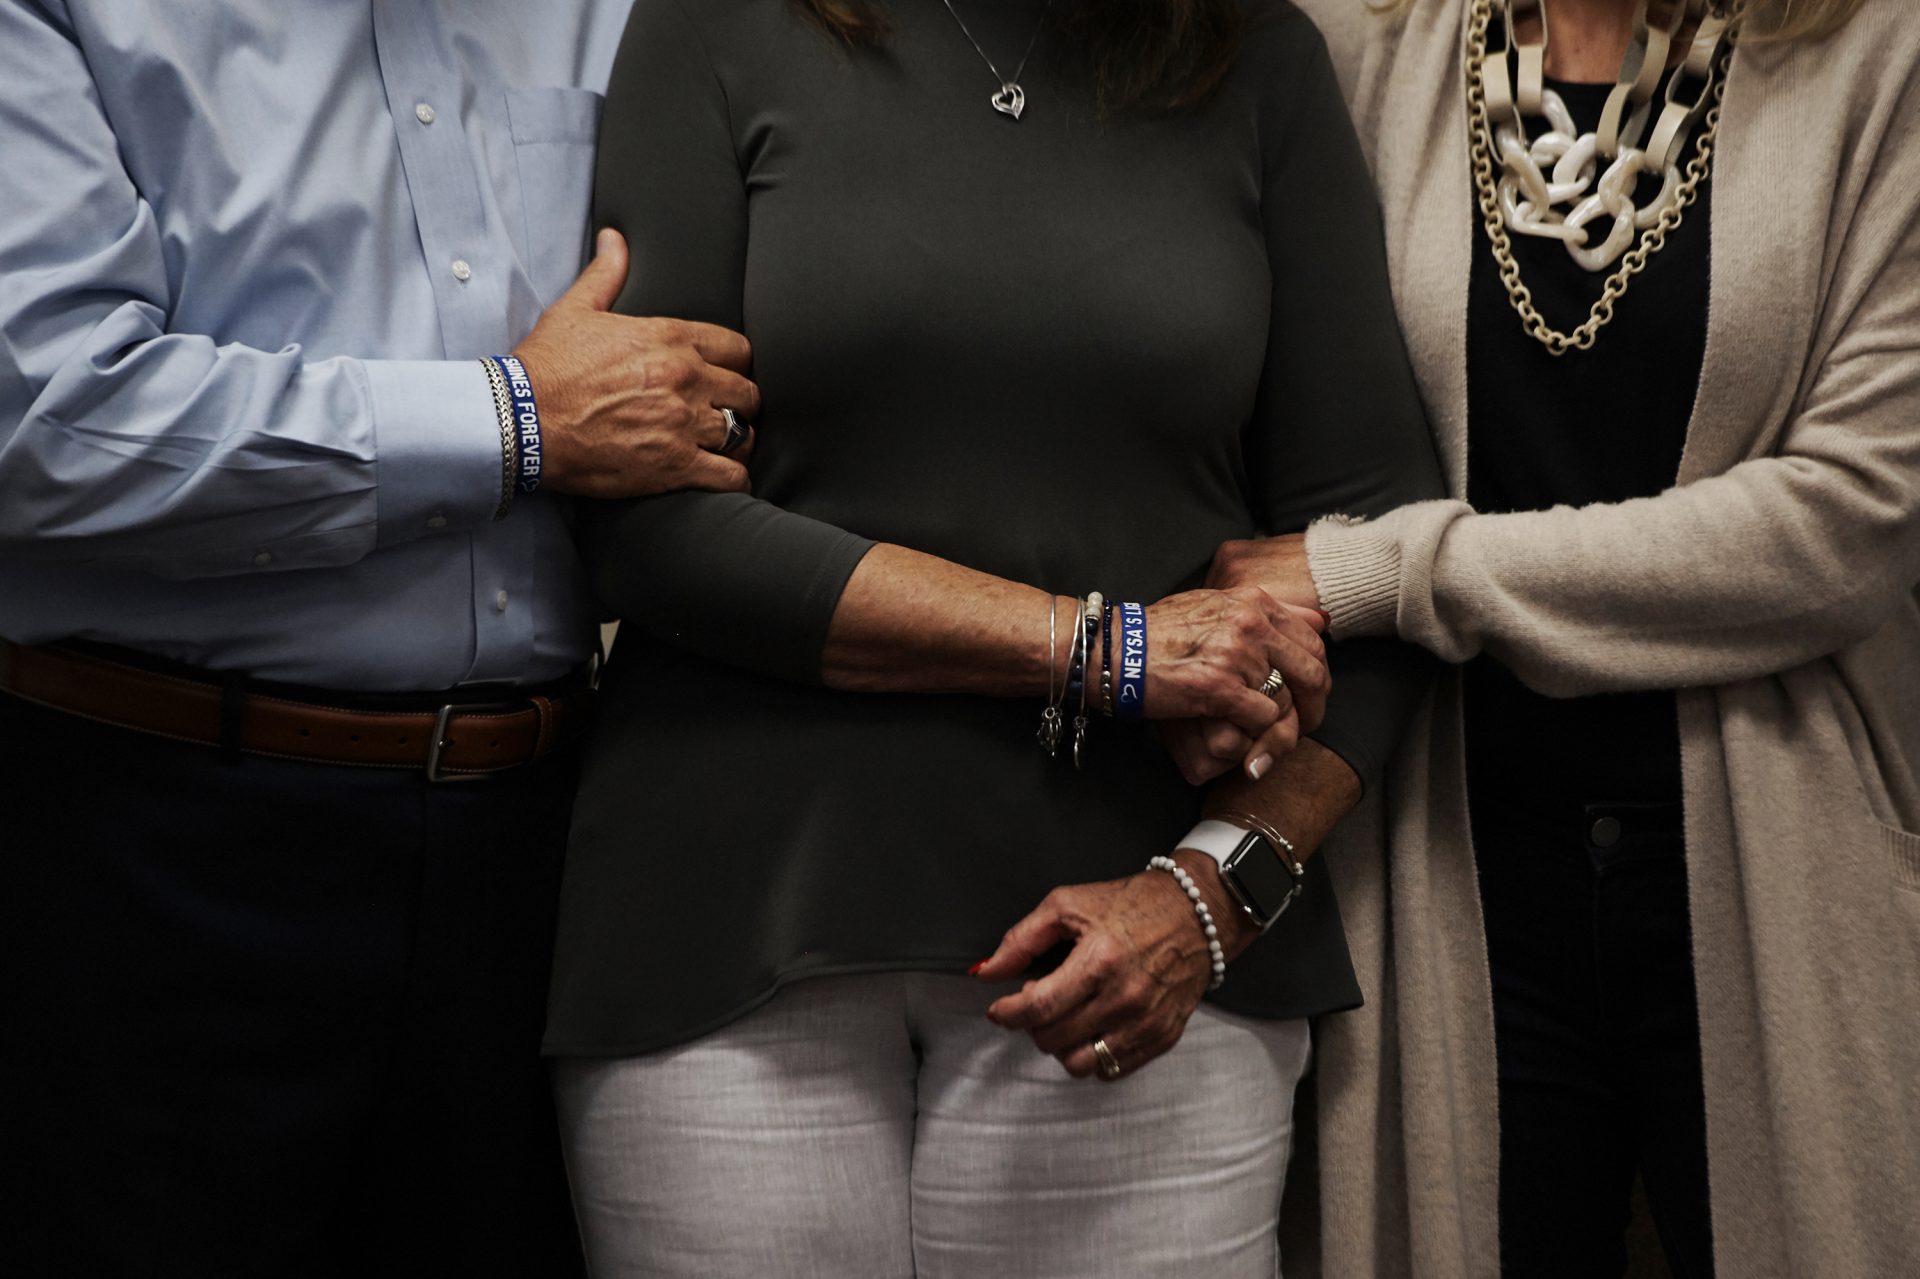 Neysa Tonks' parents, Chris and Debbie Davis, and sister, Mynda Smith, embrace during a news conference for Children of the 58 on Sept. 14, 2018, at the College of Southern Nevada in Las Vegas. Tonks was a single mother of three sons.